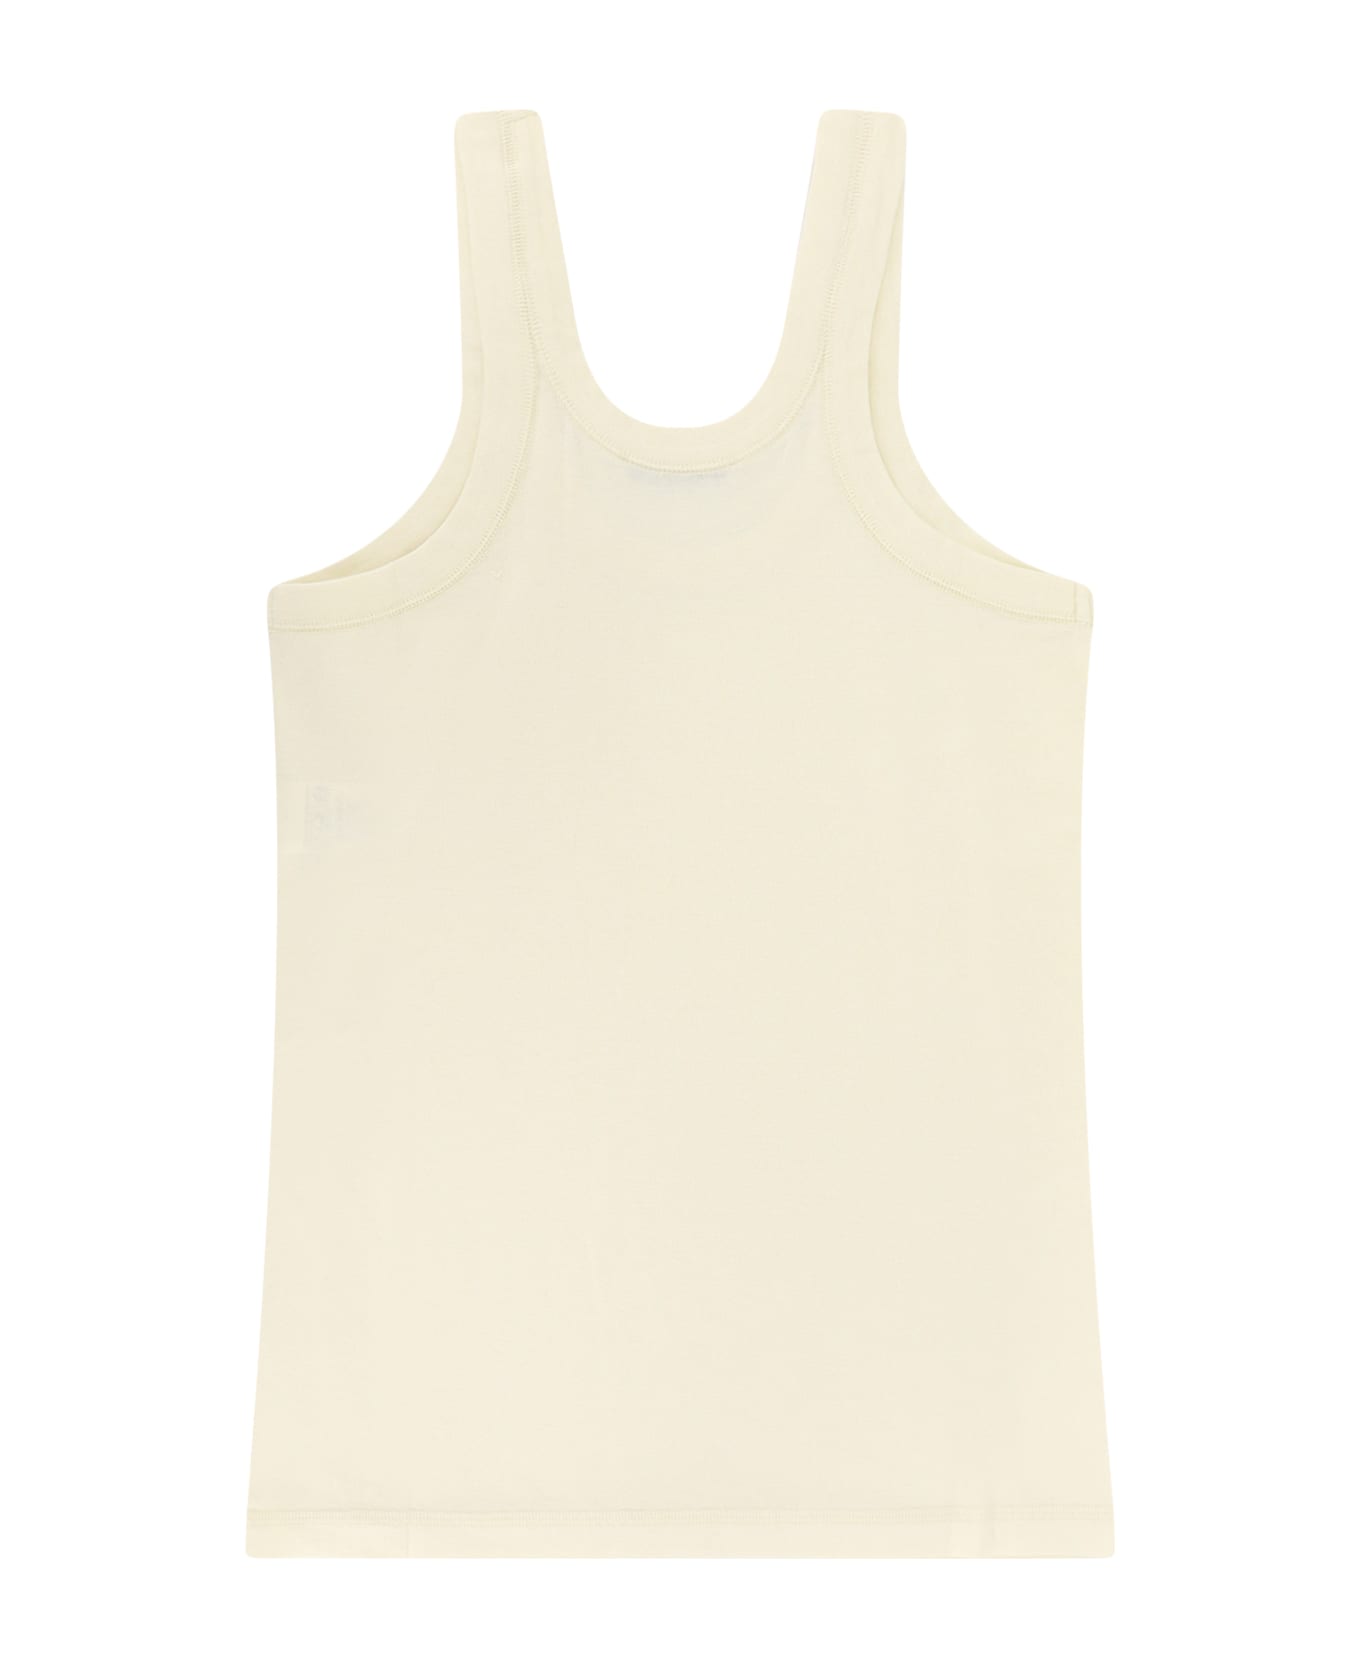 Lemaire Tank Top - Yellow